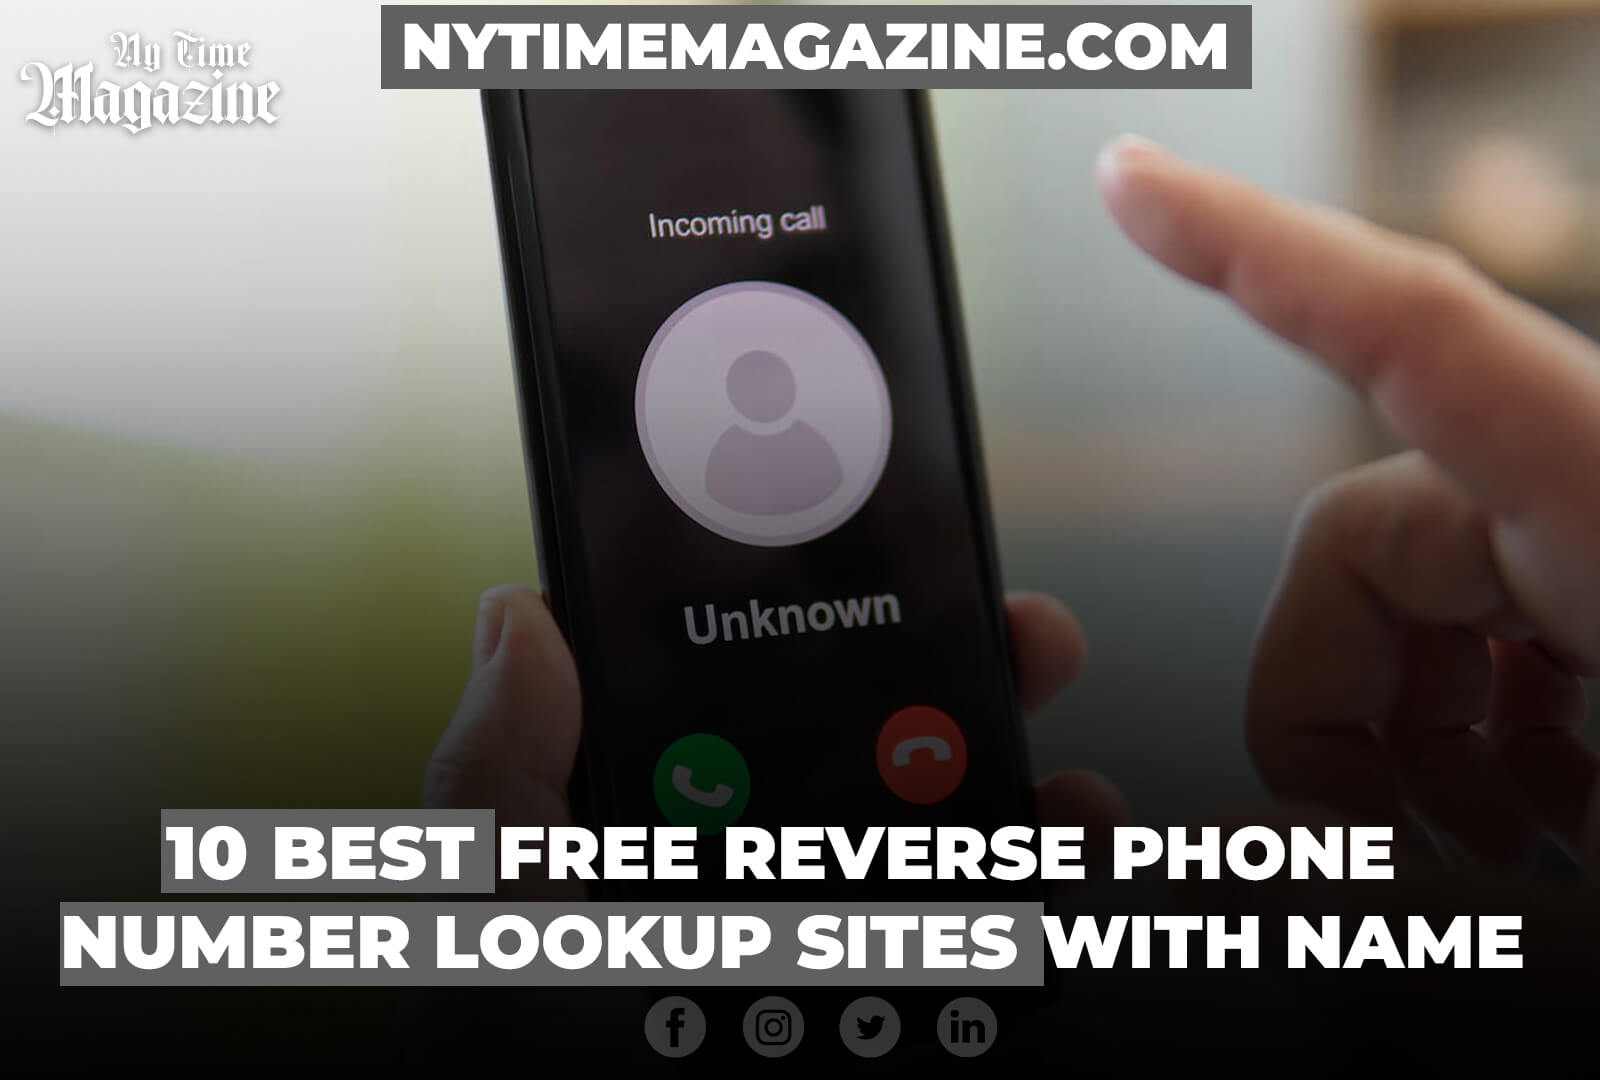 10 BEST FREE REVERSE PHONE NUMBER LOOKUP SITES WITH NAME